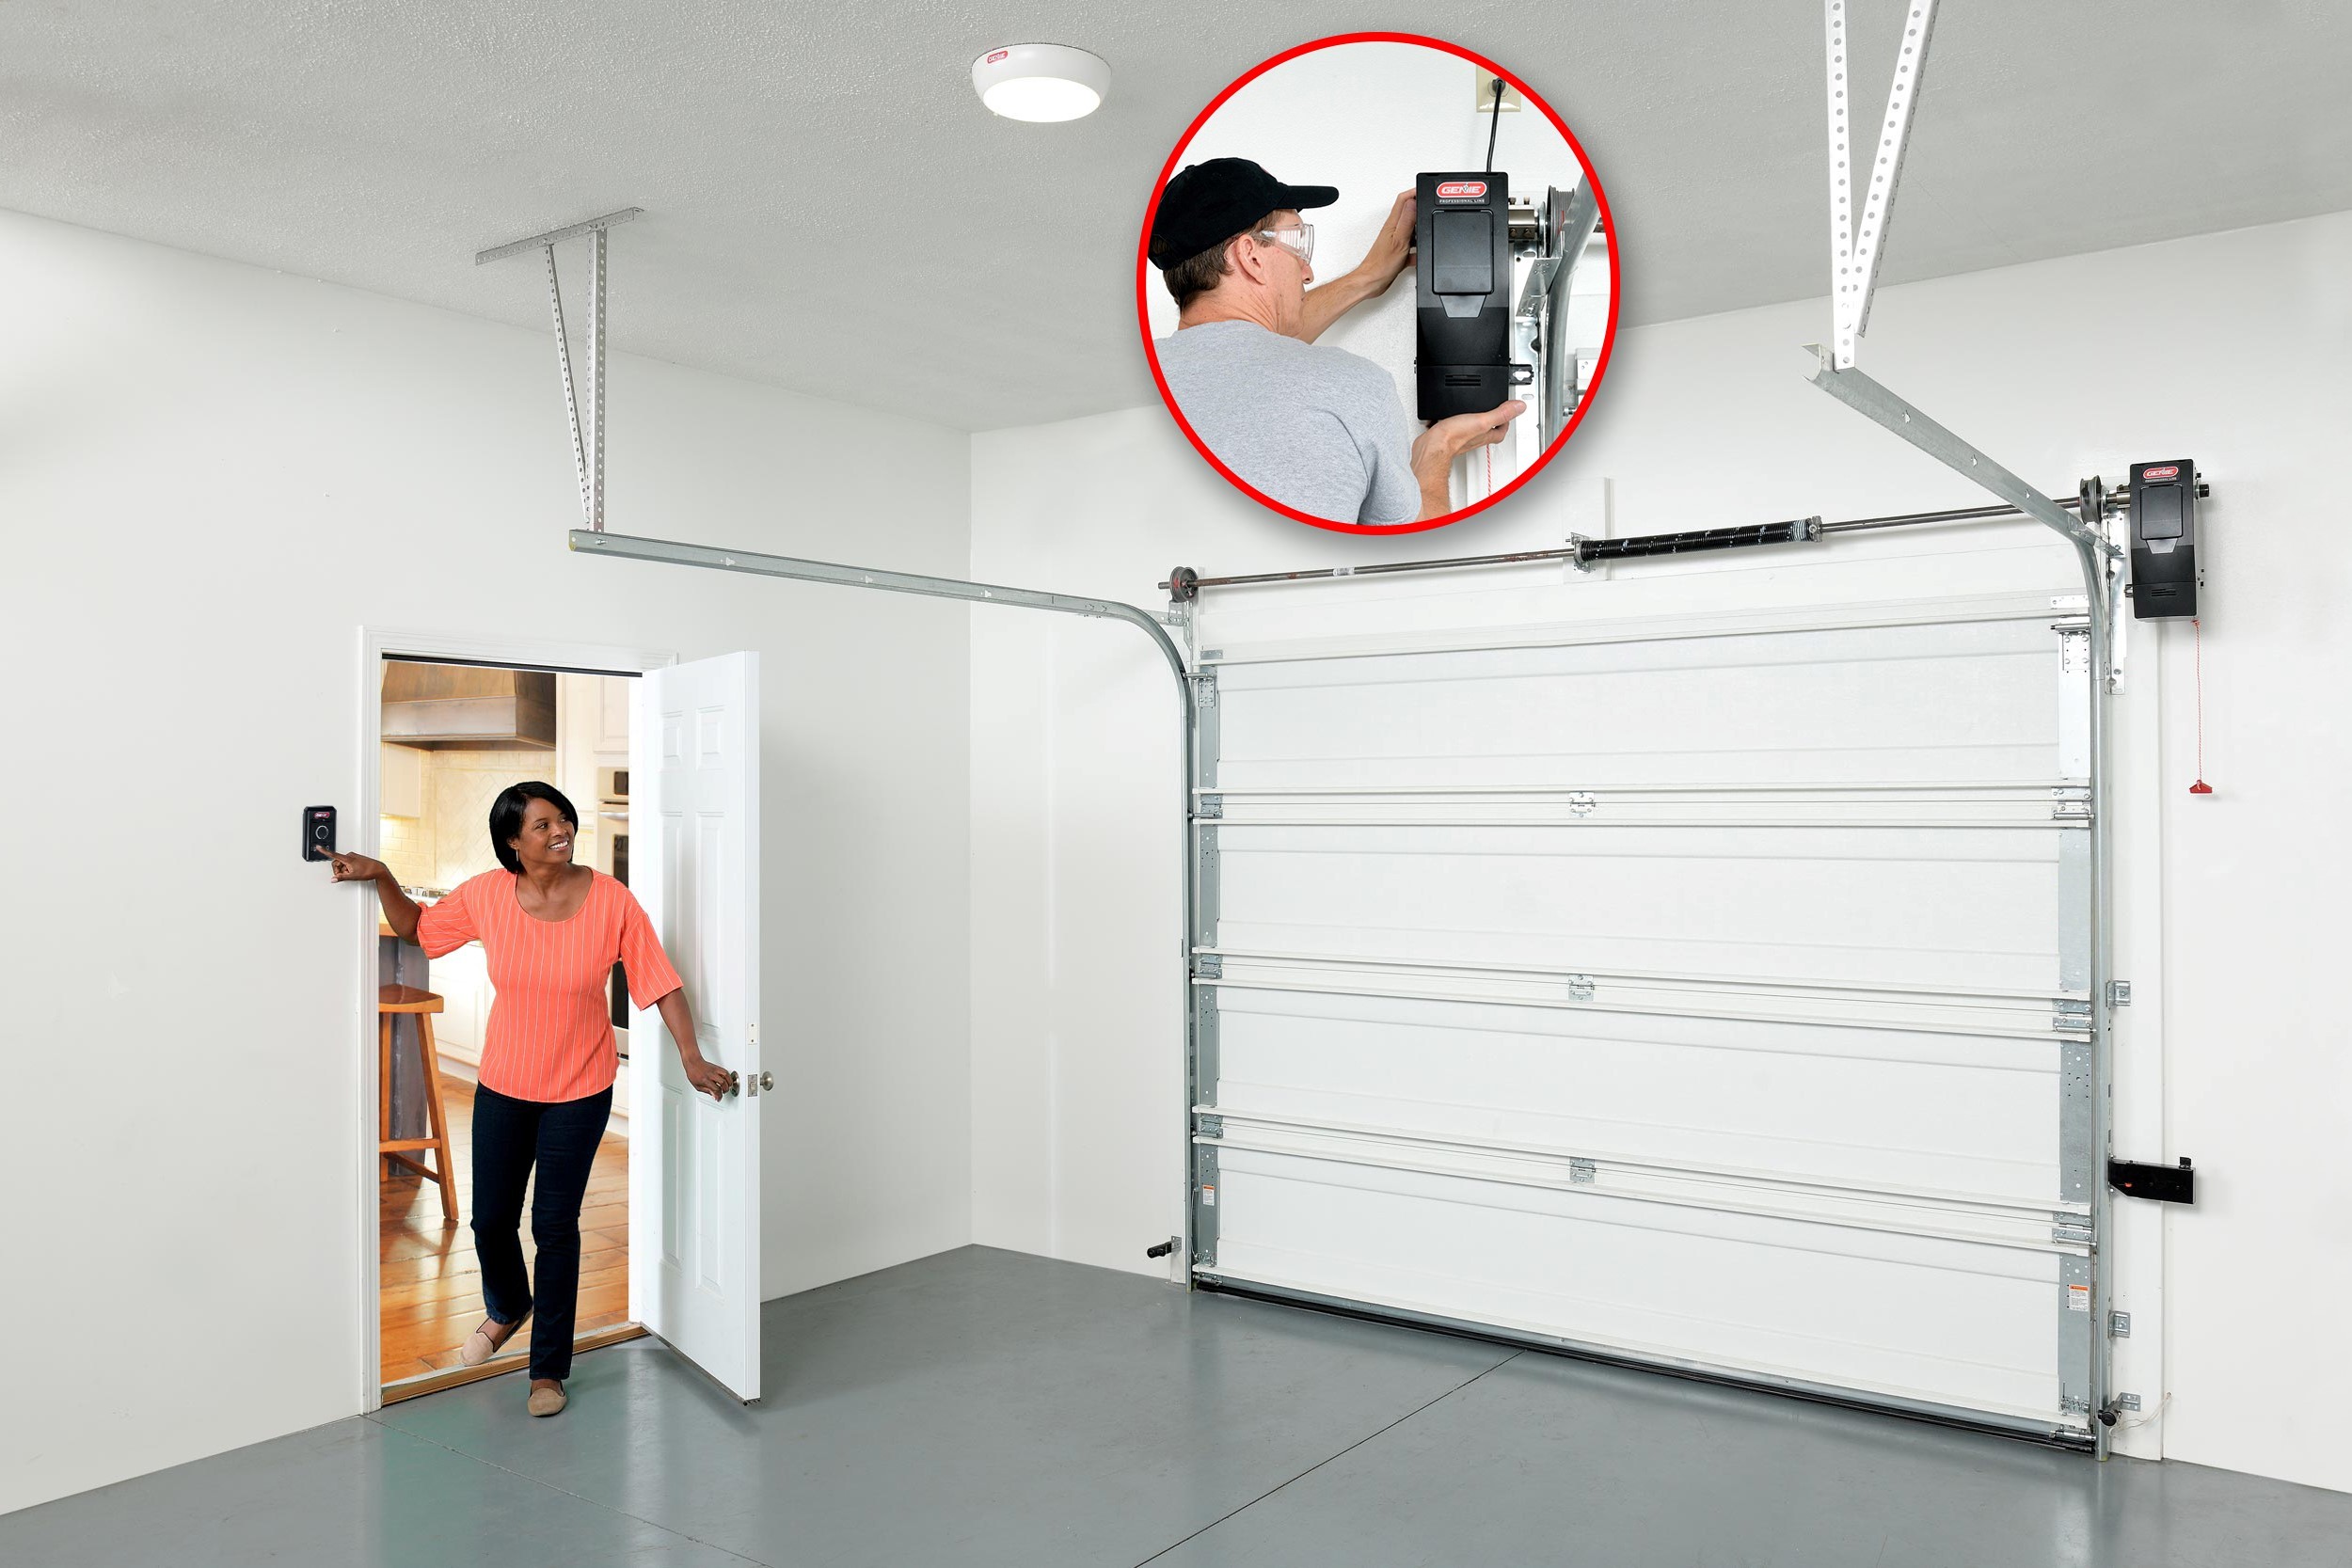 The Genie Company Launches All-New Wall Mount Garage Door Openers ... - Genie Wall Mount Opener MoDel 6170 With IntegrateD AlaDDin Connect AnD BBU  01.08.20